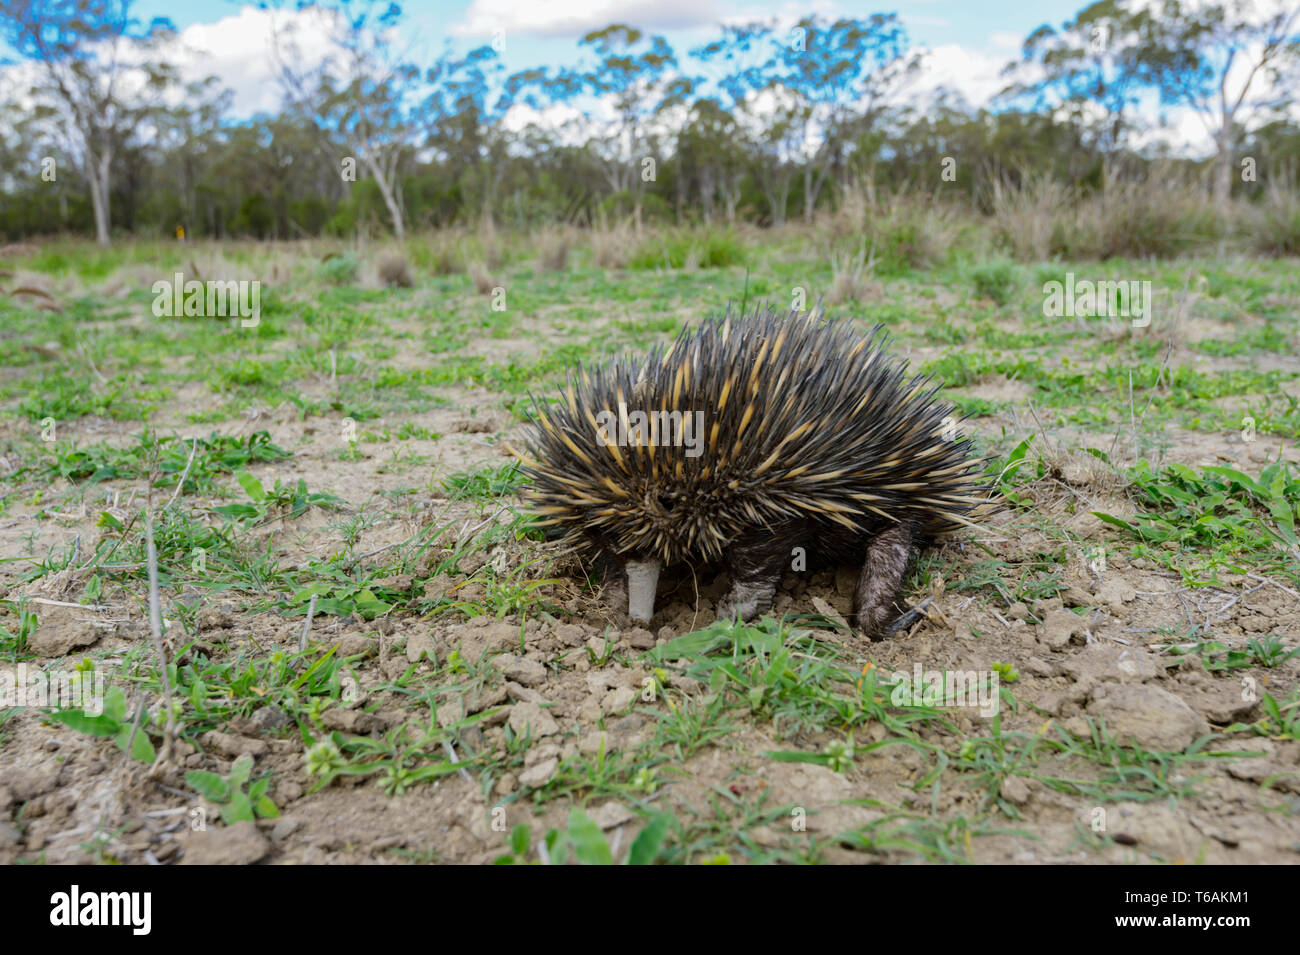 Short-nosed Echidna or Short-beaked Echidna (Tachyglossus aculeatus) feeding on ants, near Injune in the Queensland interior, QLD, Australia Stock Photo